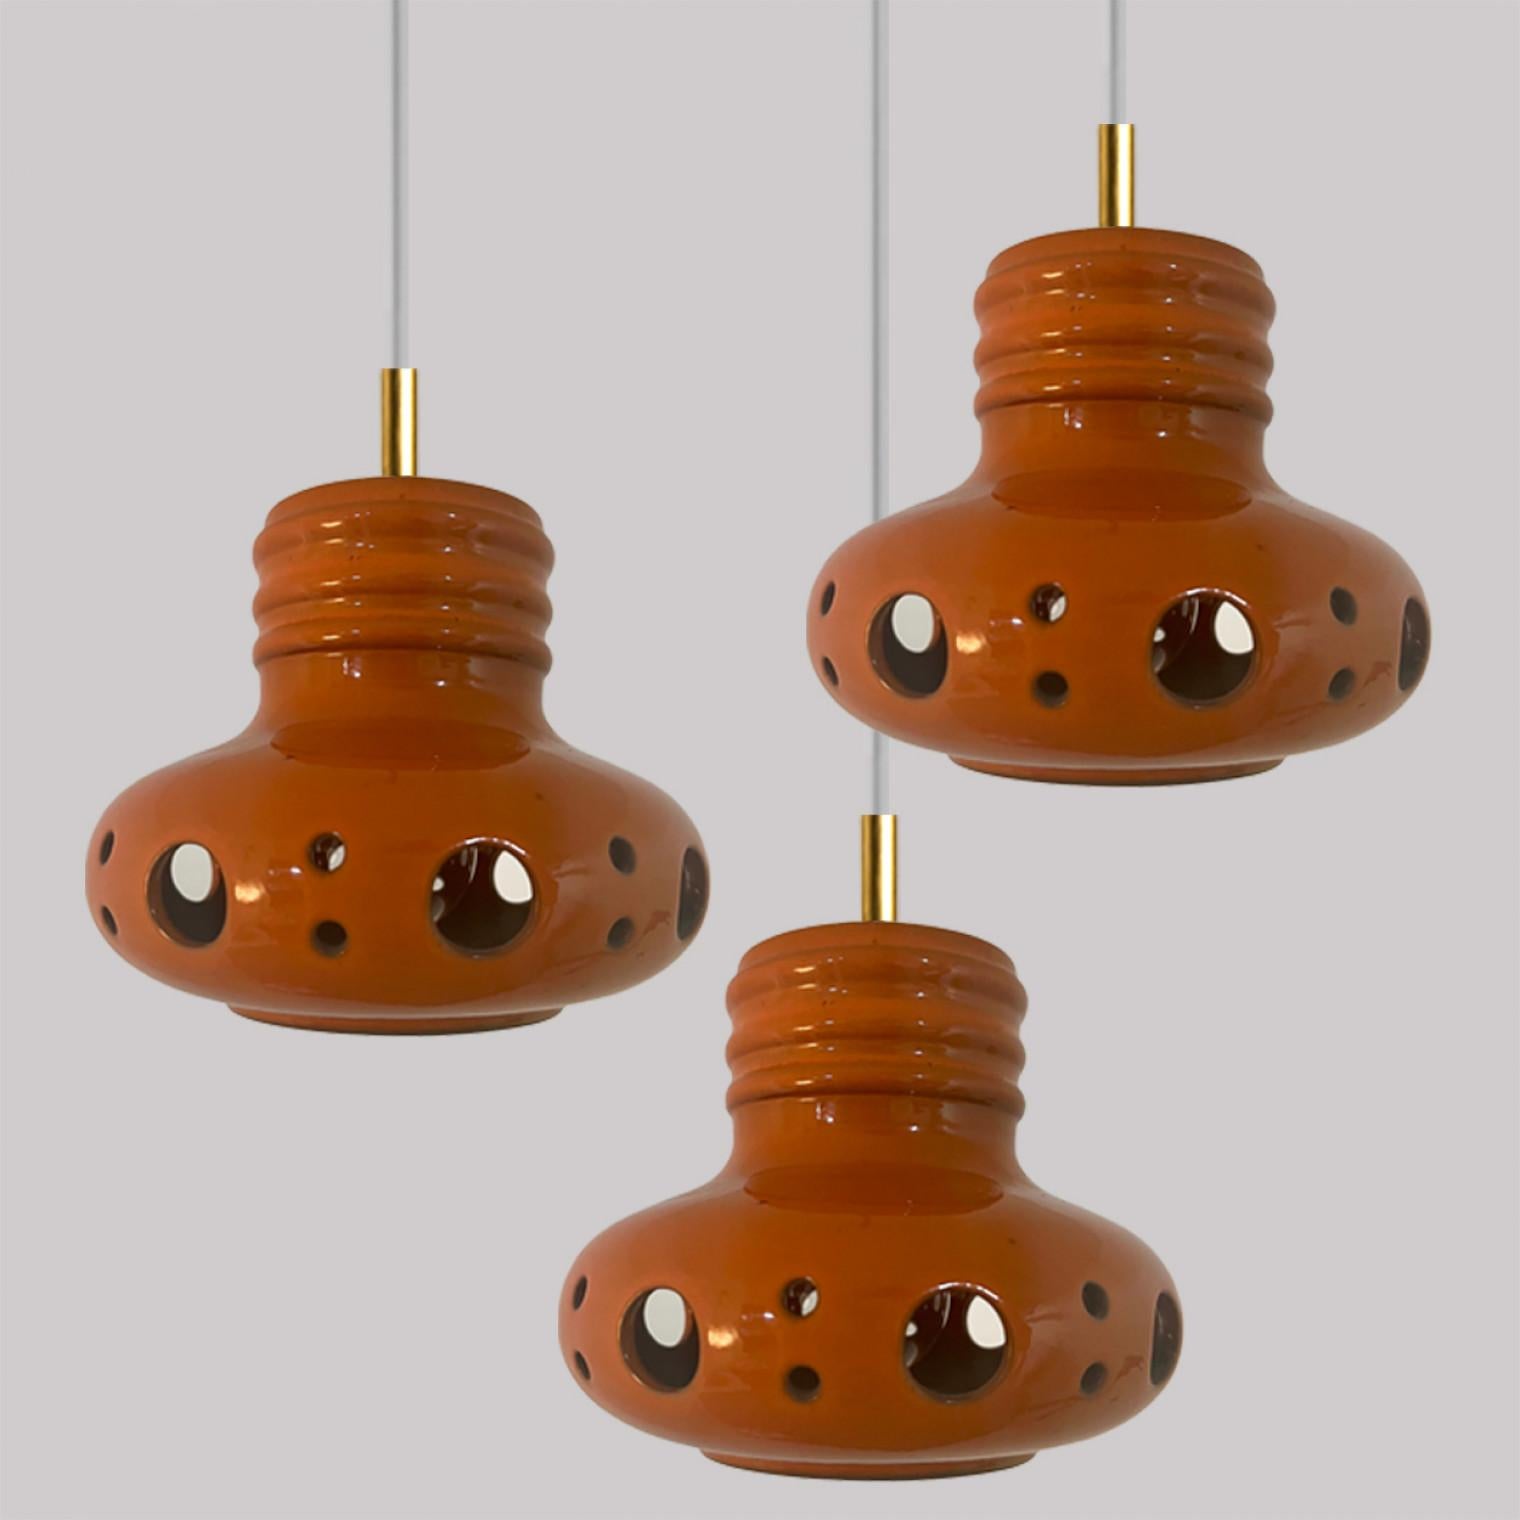 1 of the 3  spectacular and stylish ceramic pendant lights made in West-Germany around 1970's. The lights are made of orange and brown glazed ceramic and glazed in 'Fat Lava' style. The orange and brown ceramic fits beautifully with warm, gold or